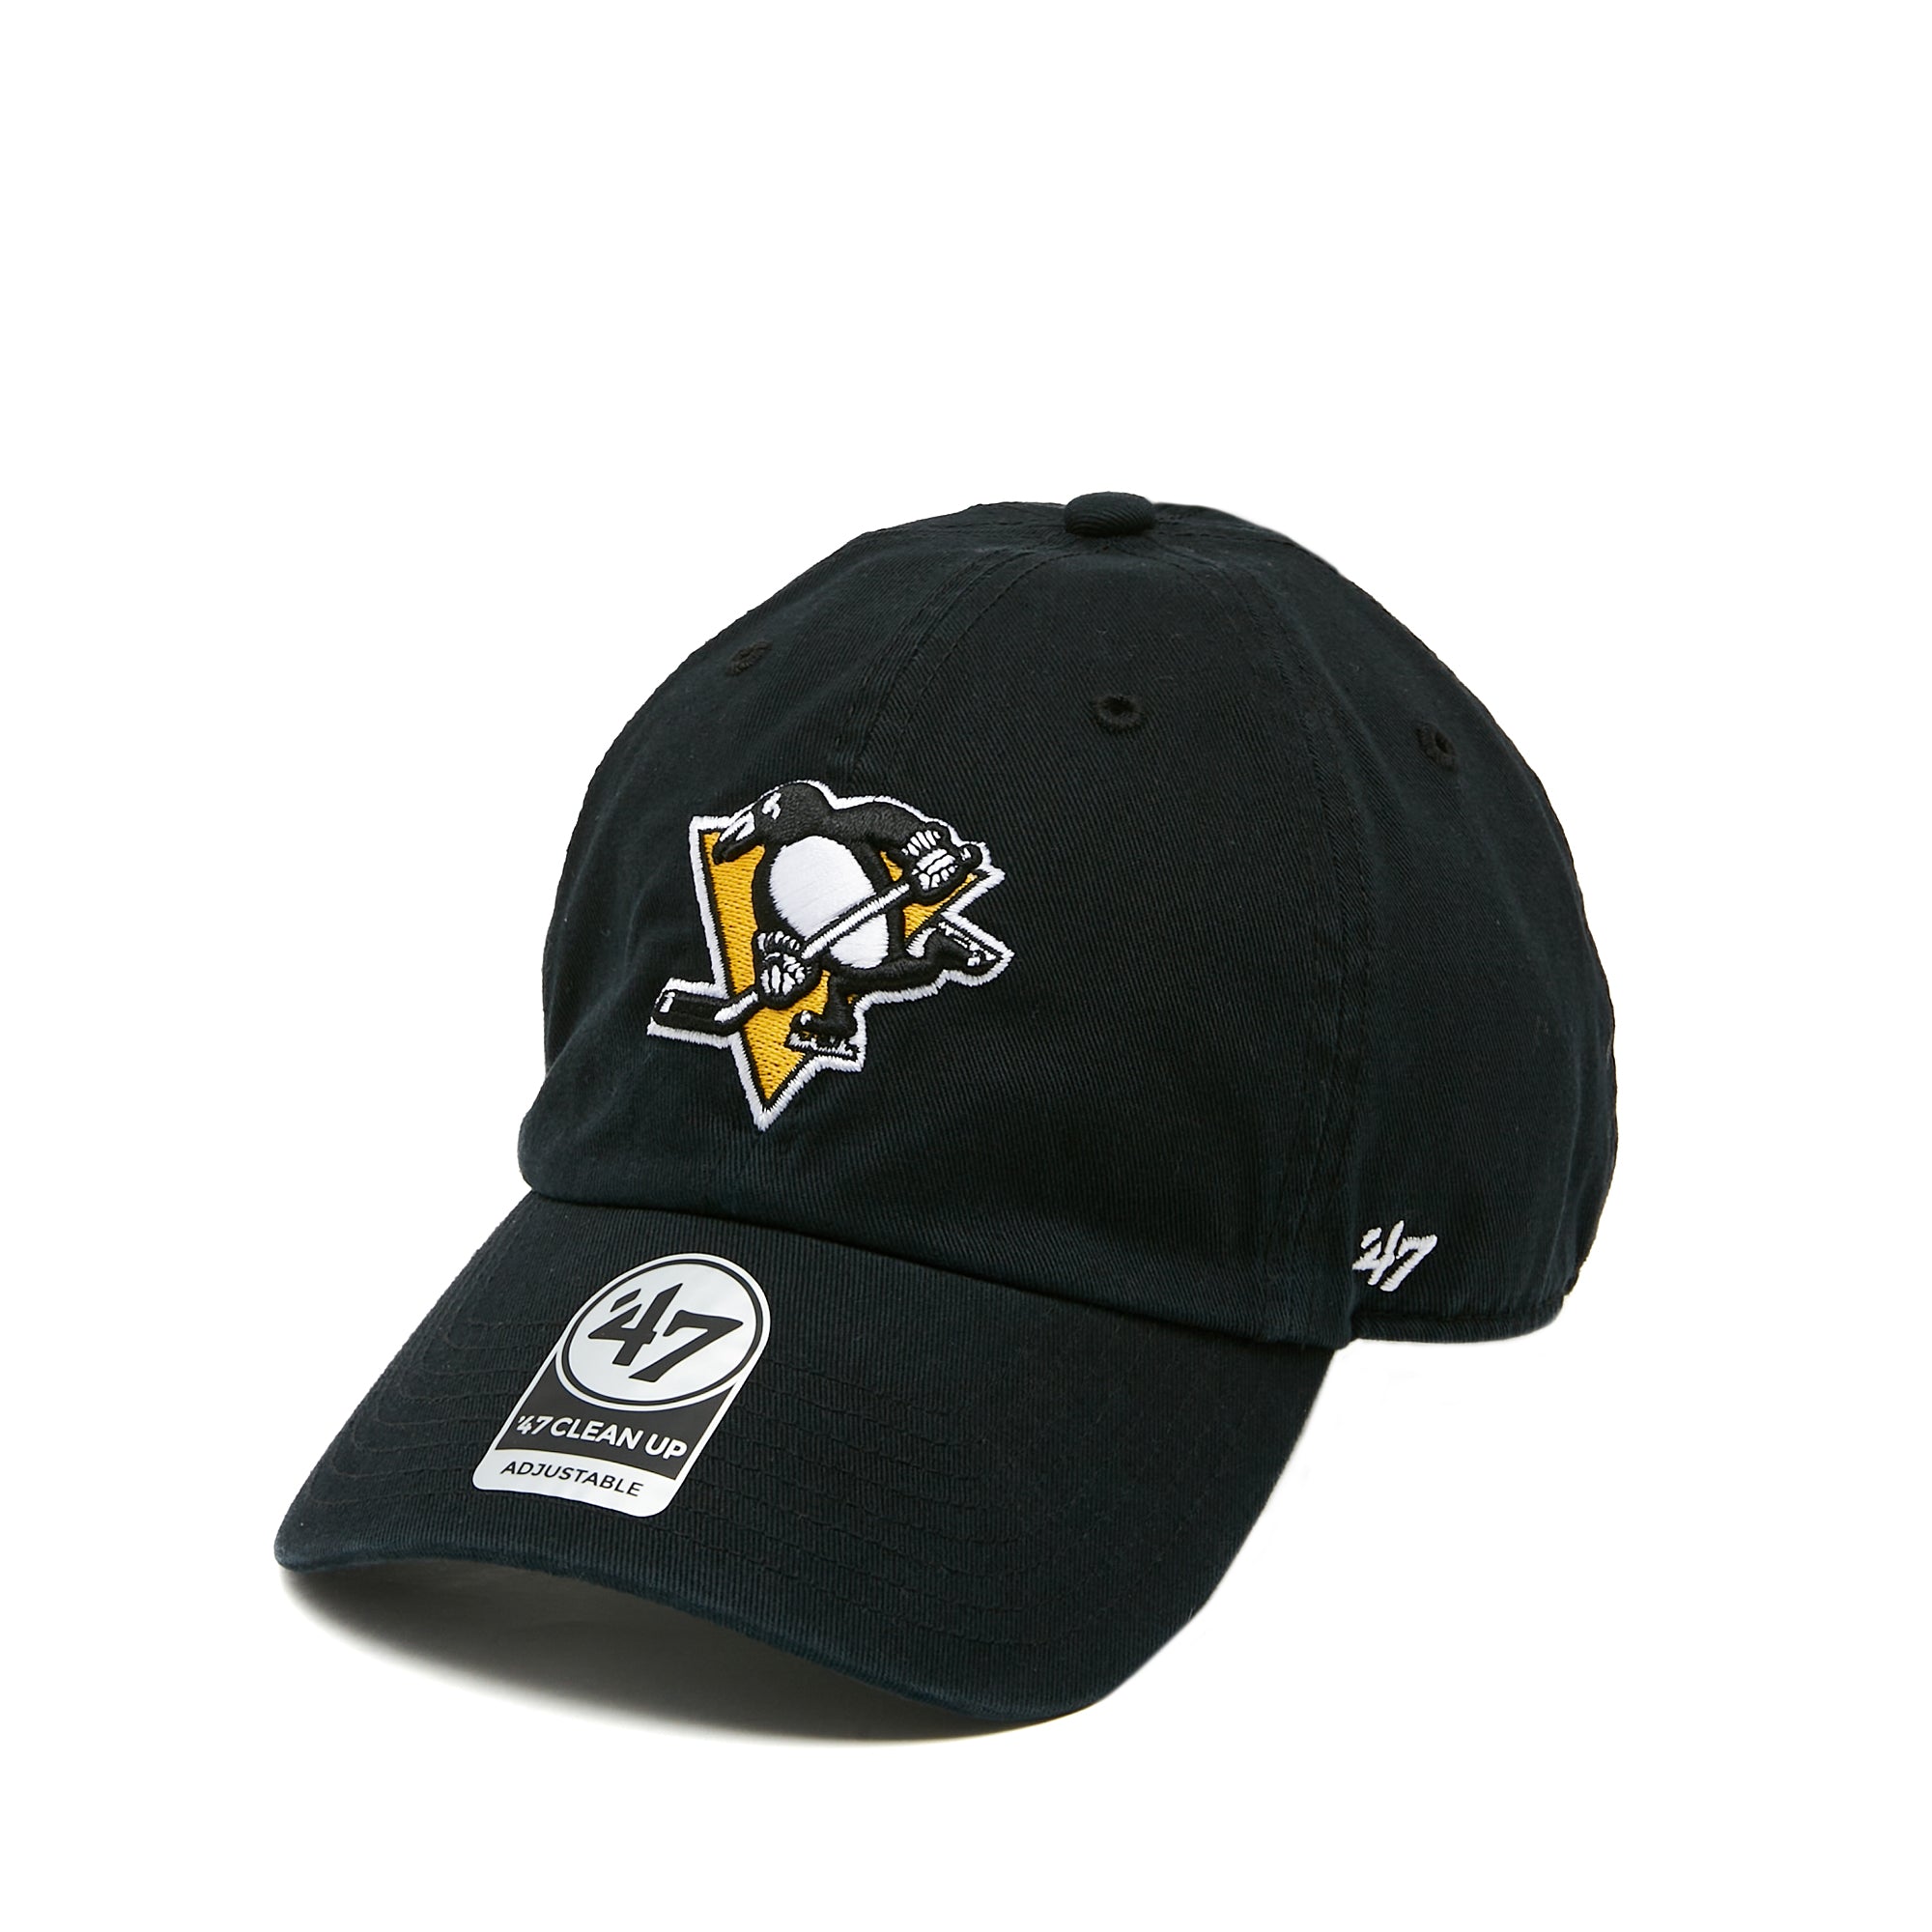 NHL Pittsburgh Penguins '47 Clean Up Cap Black One Size